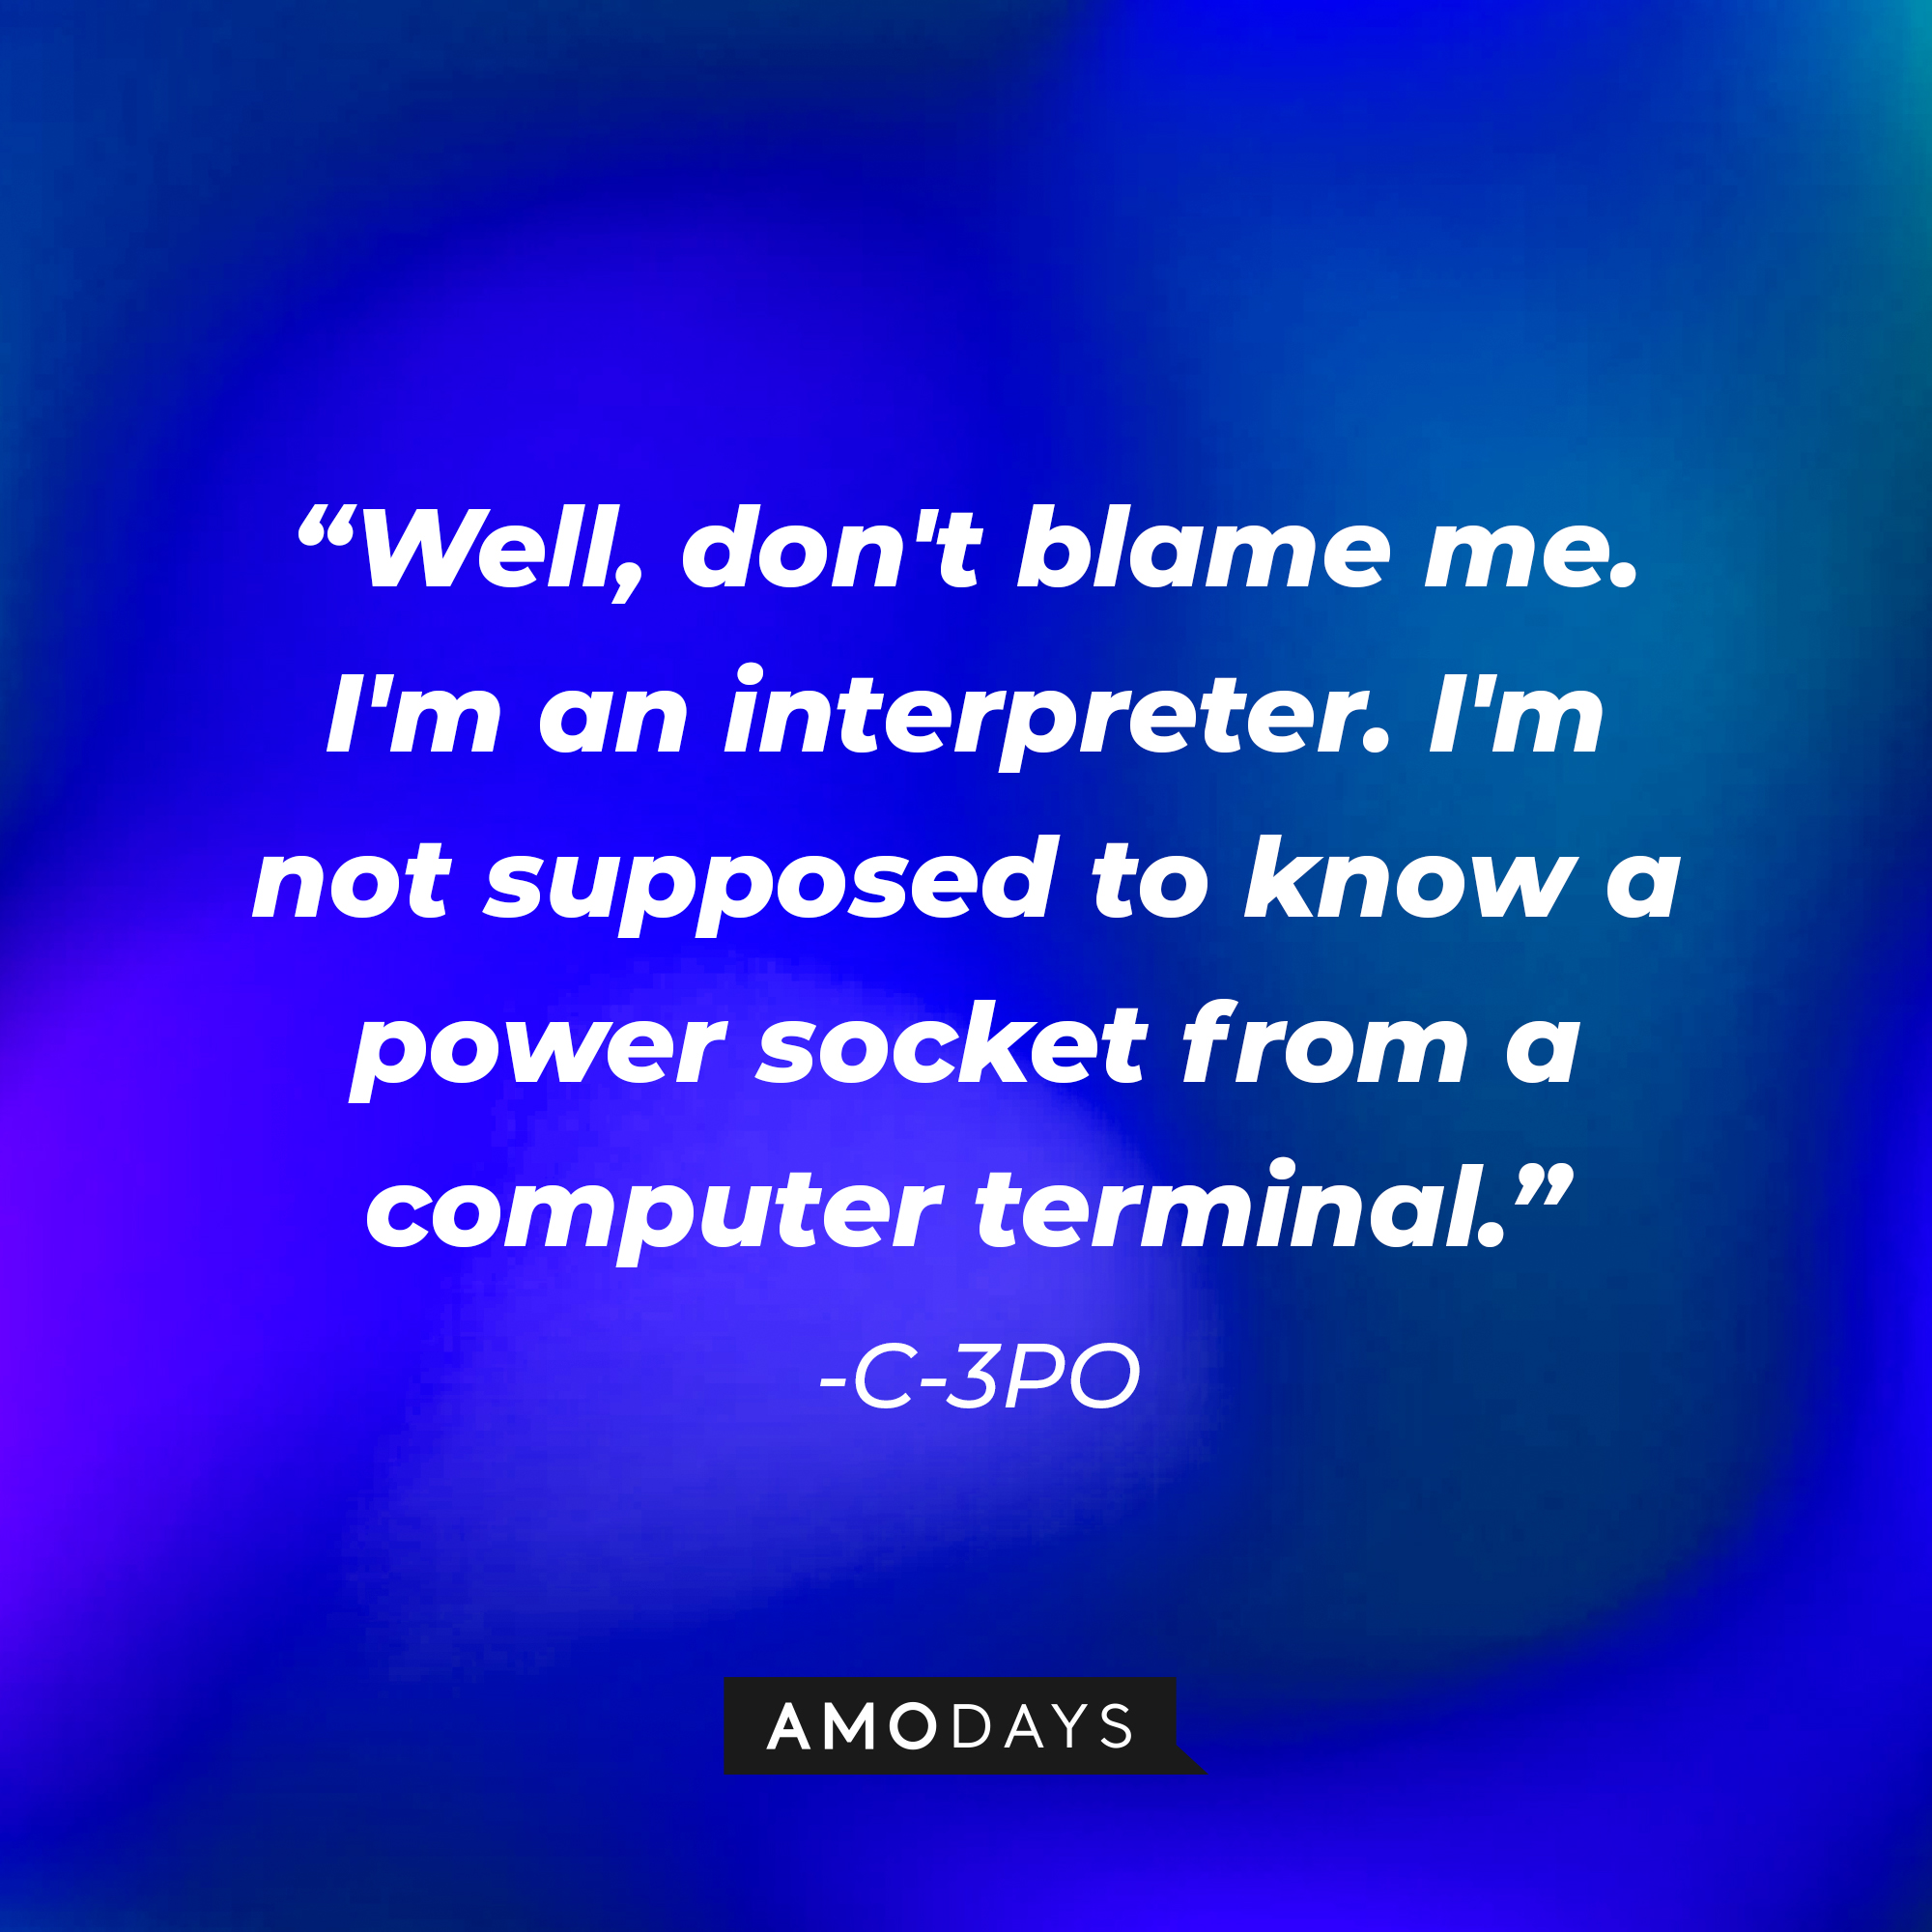 C-3PO's quote: "Well, don't blame me. I'm an interpreter. I'm not supposed to know a power socket from a computer terminal." | Source: AmoDays